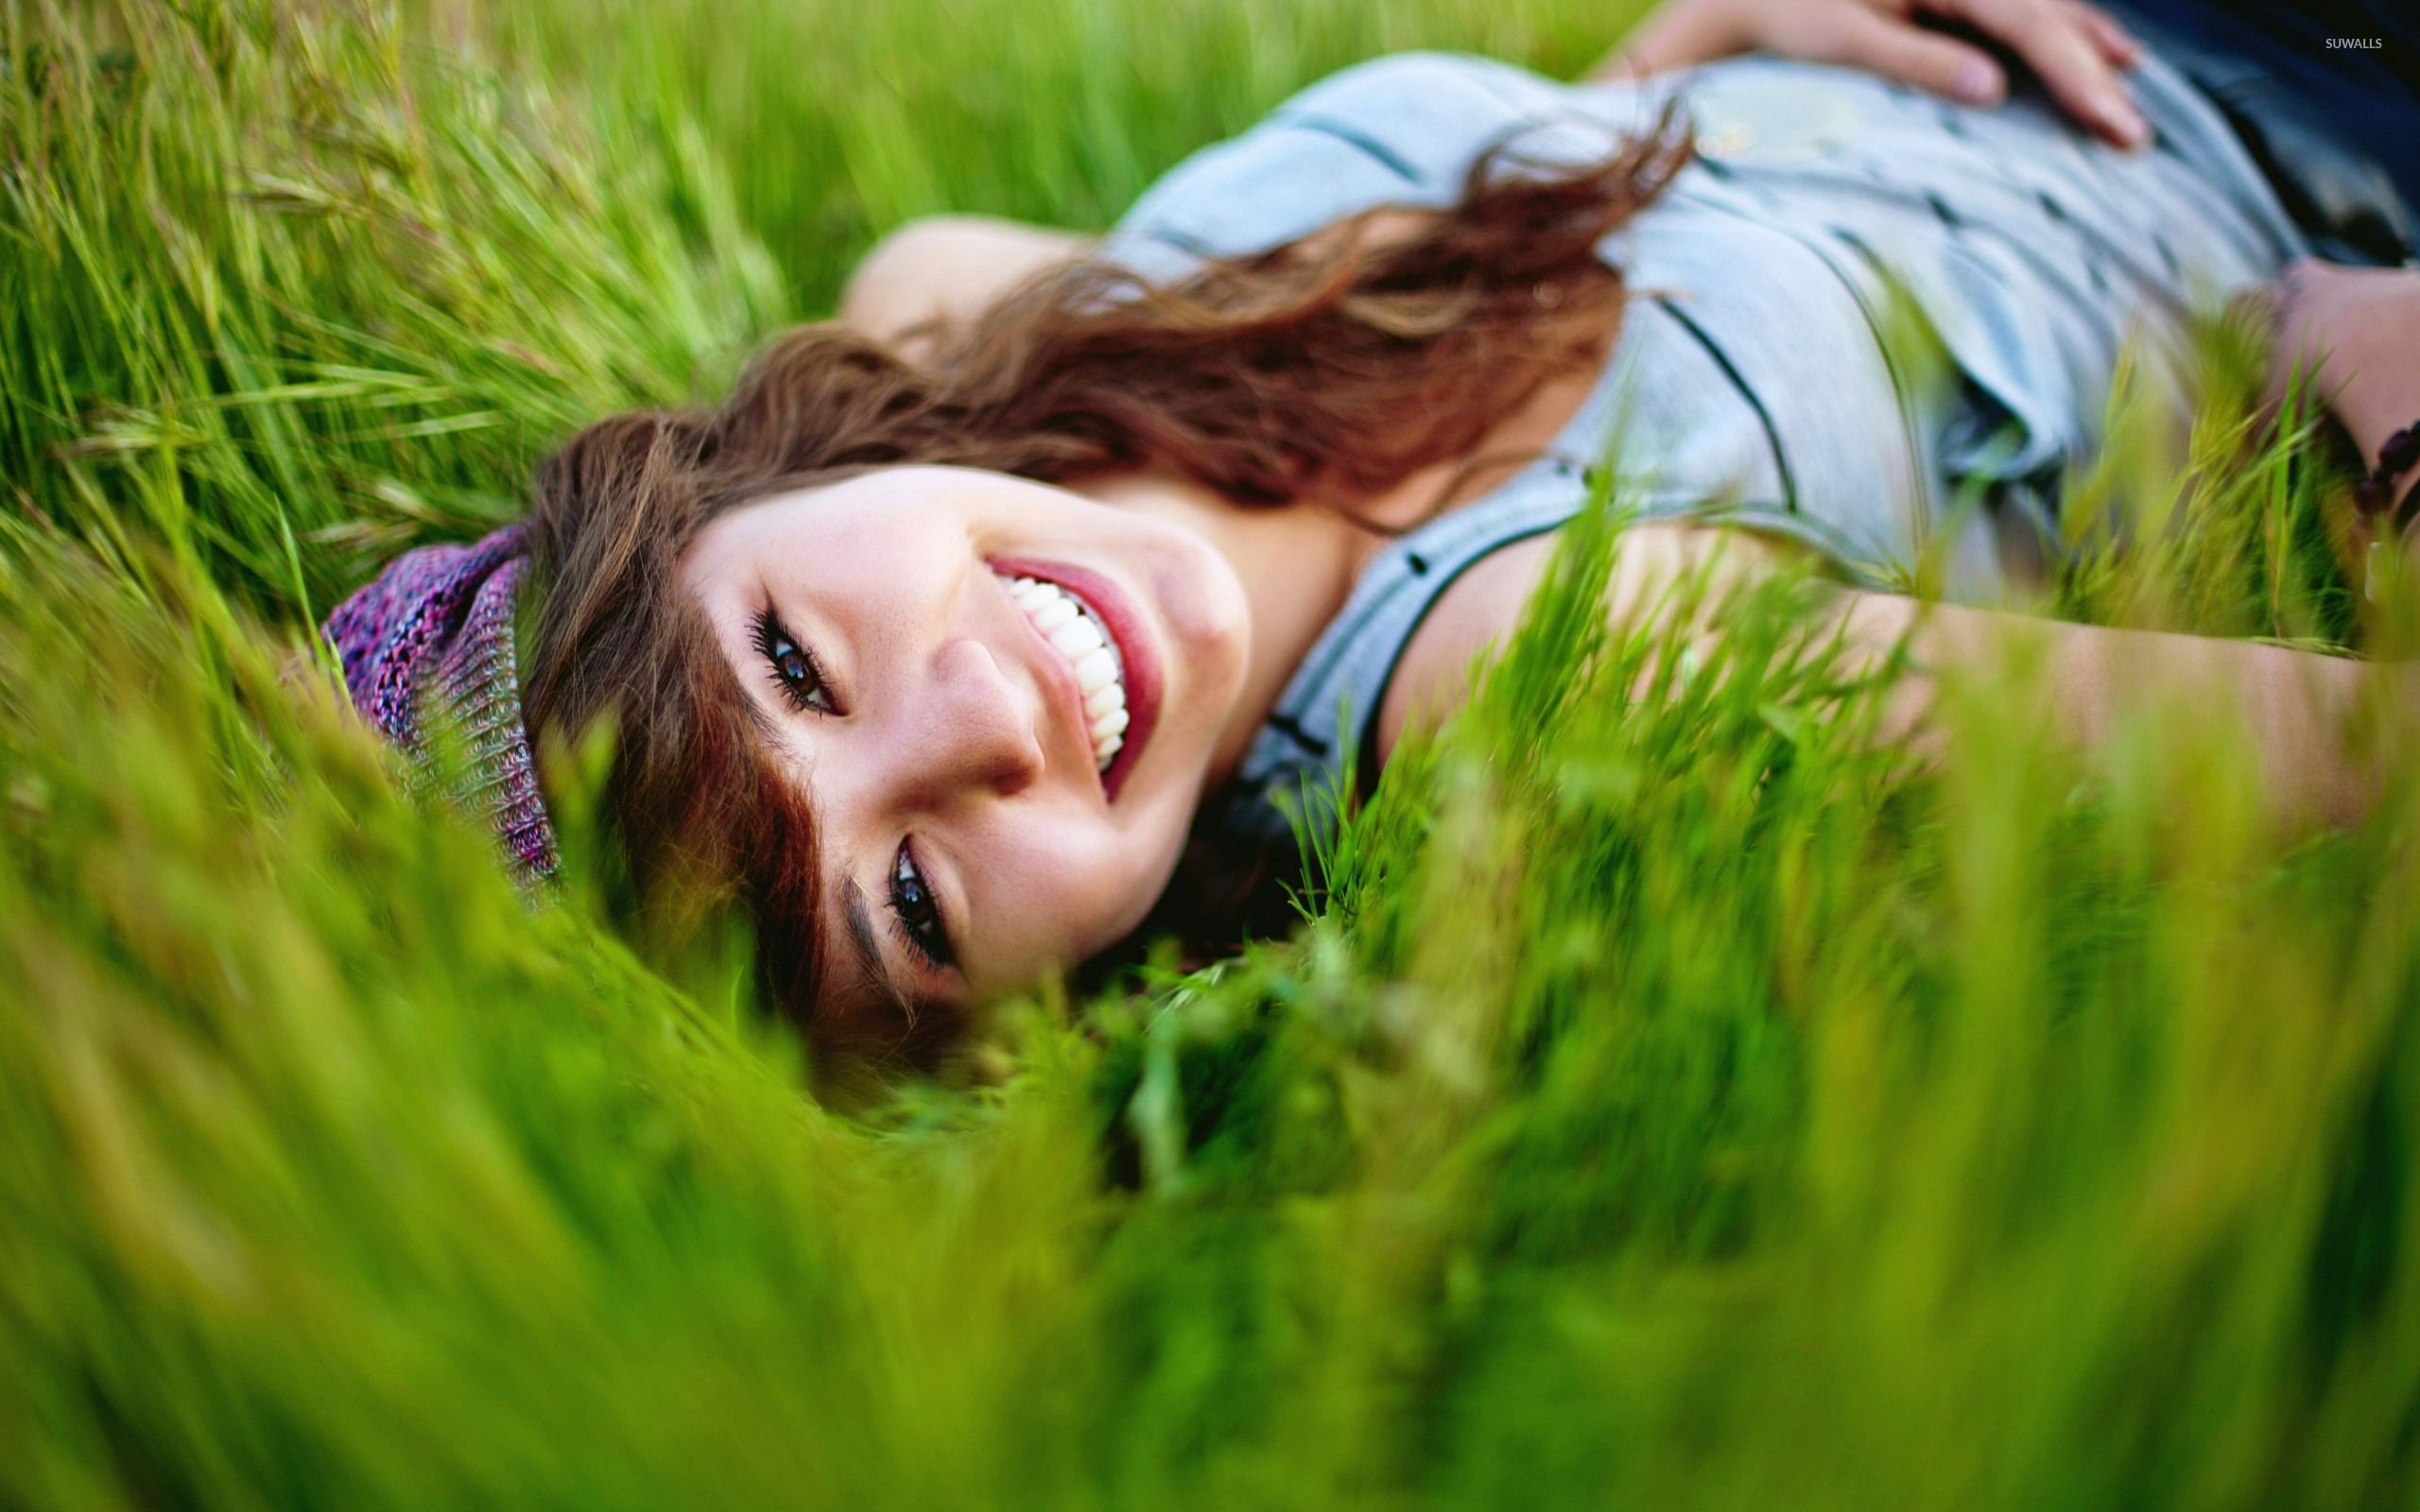 Happy girl in the grass wallpaper - Girl wallpapers - #28859